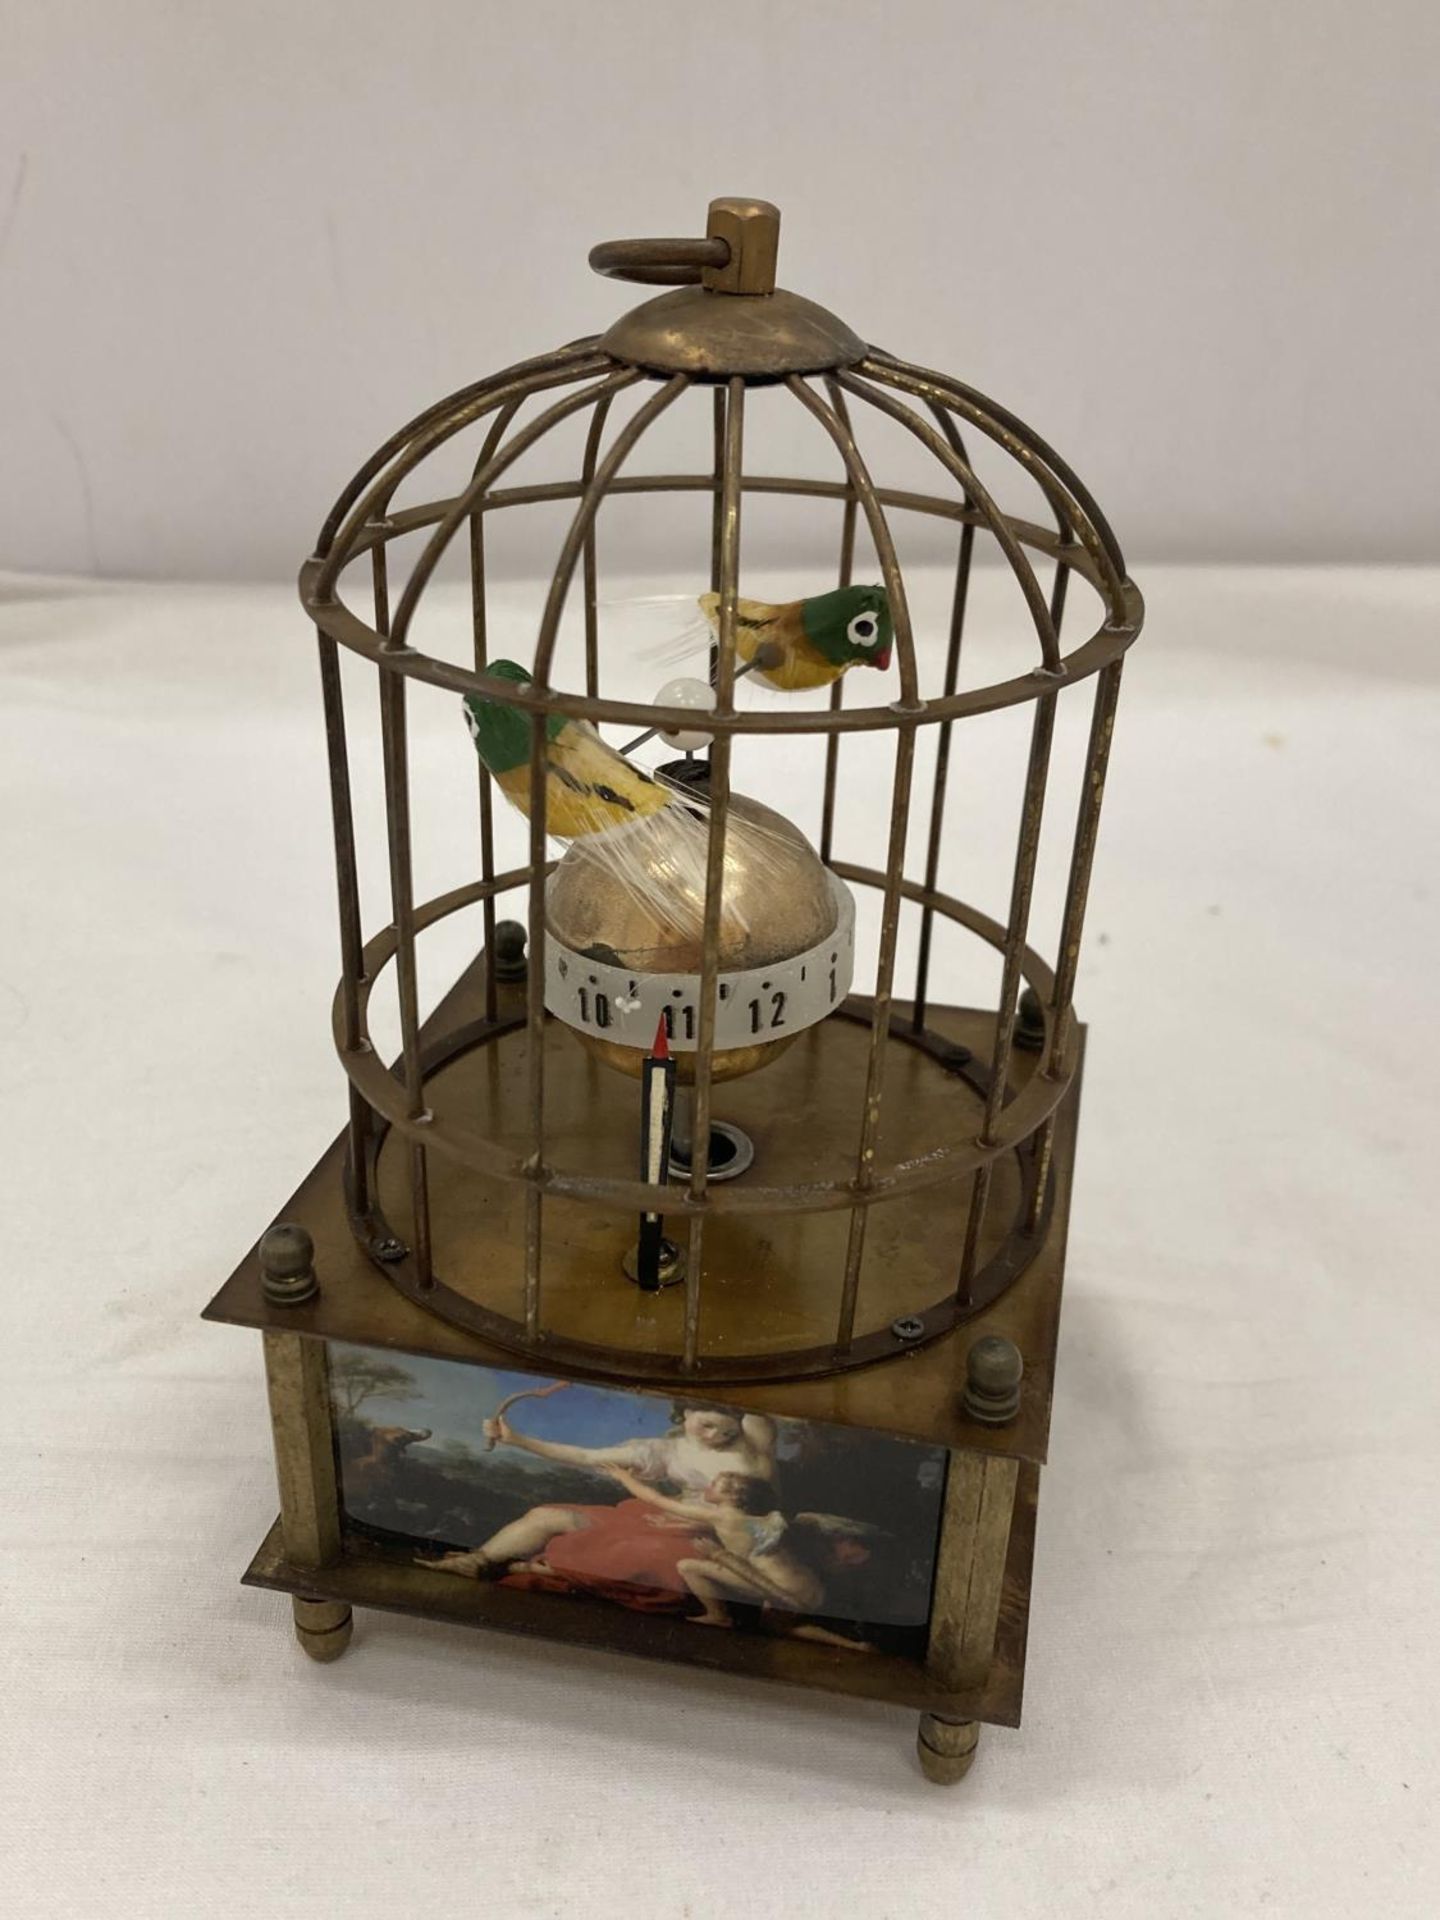 A BRASS MECHANICAL BIRD CAGE CLOCK SEEN WORKING BUT NO WARRANTY - Image 3 of 4